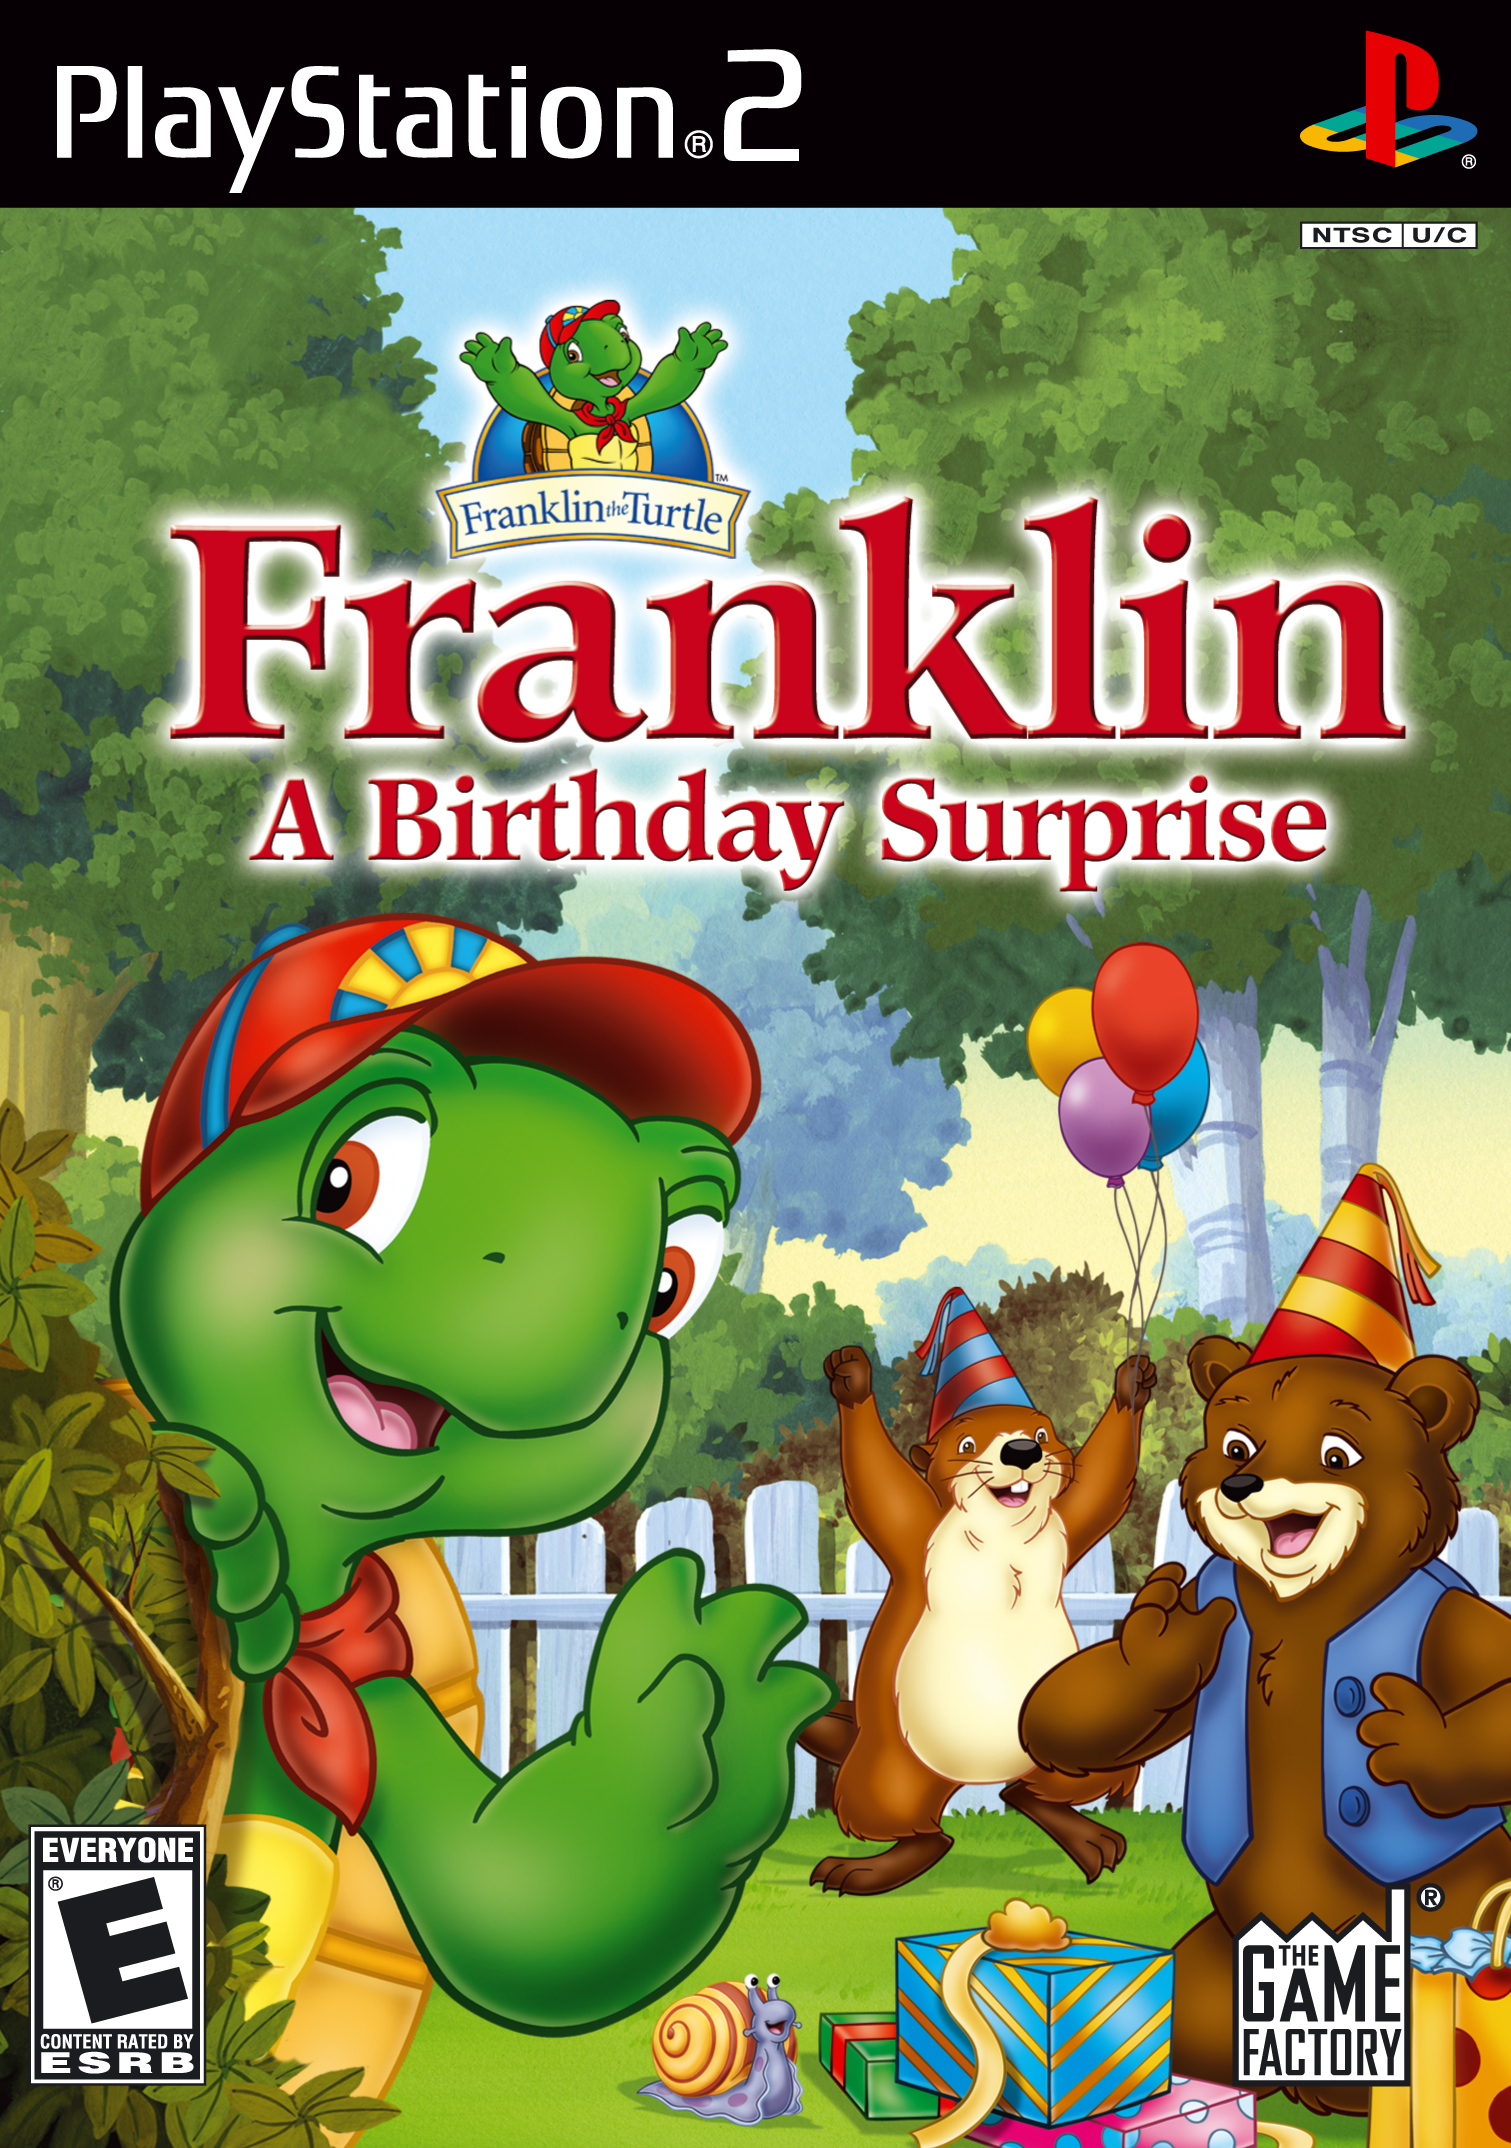 http://www.familyfriendlygaming.com/Reviews/2005-2006/Review%20Franklin%20A%20Birthday%20Surprise.html